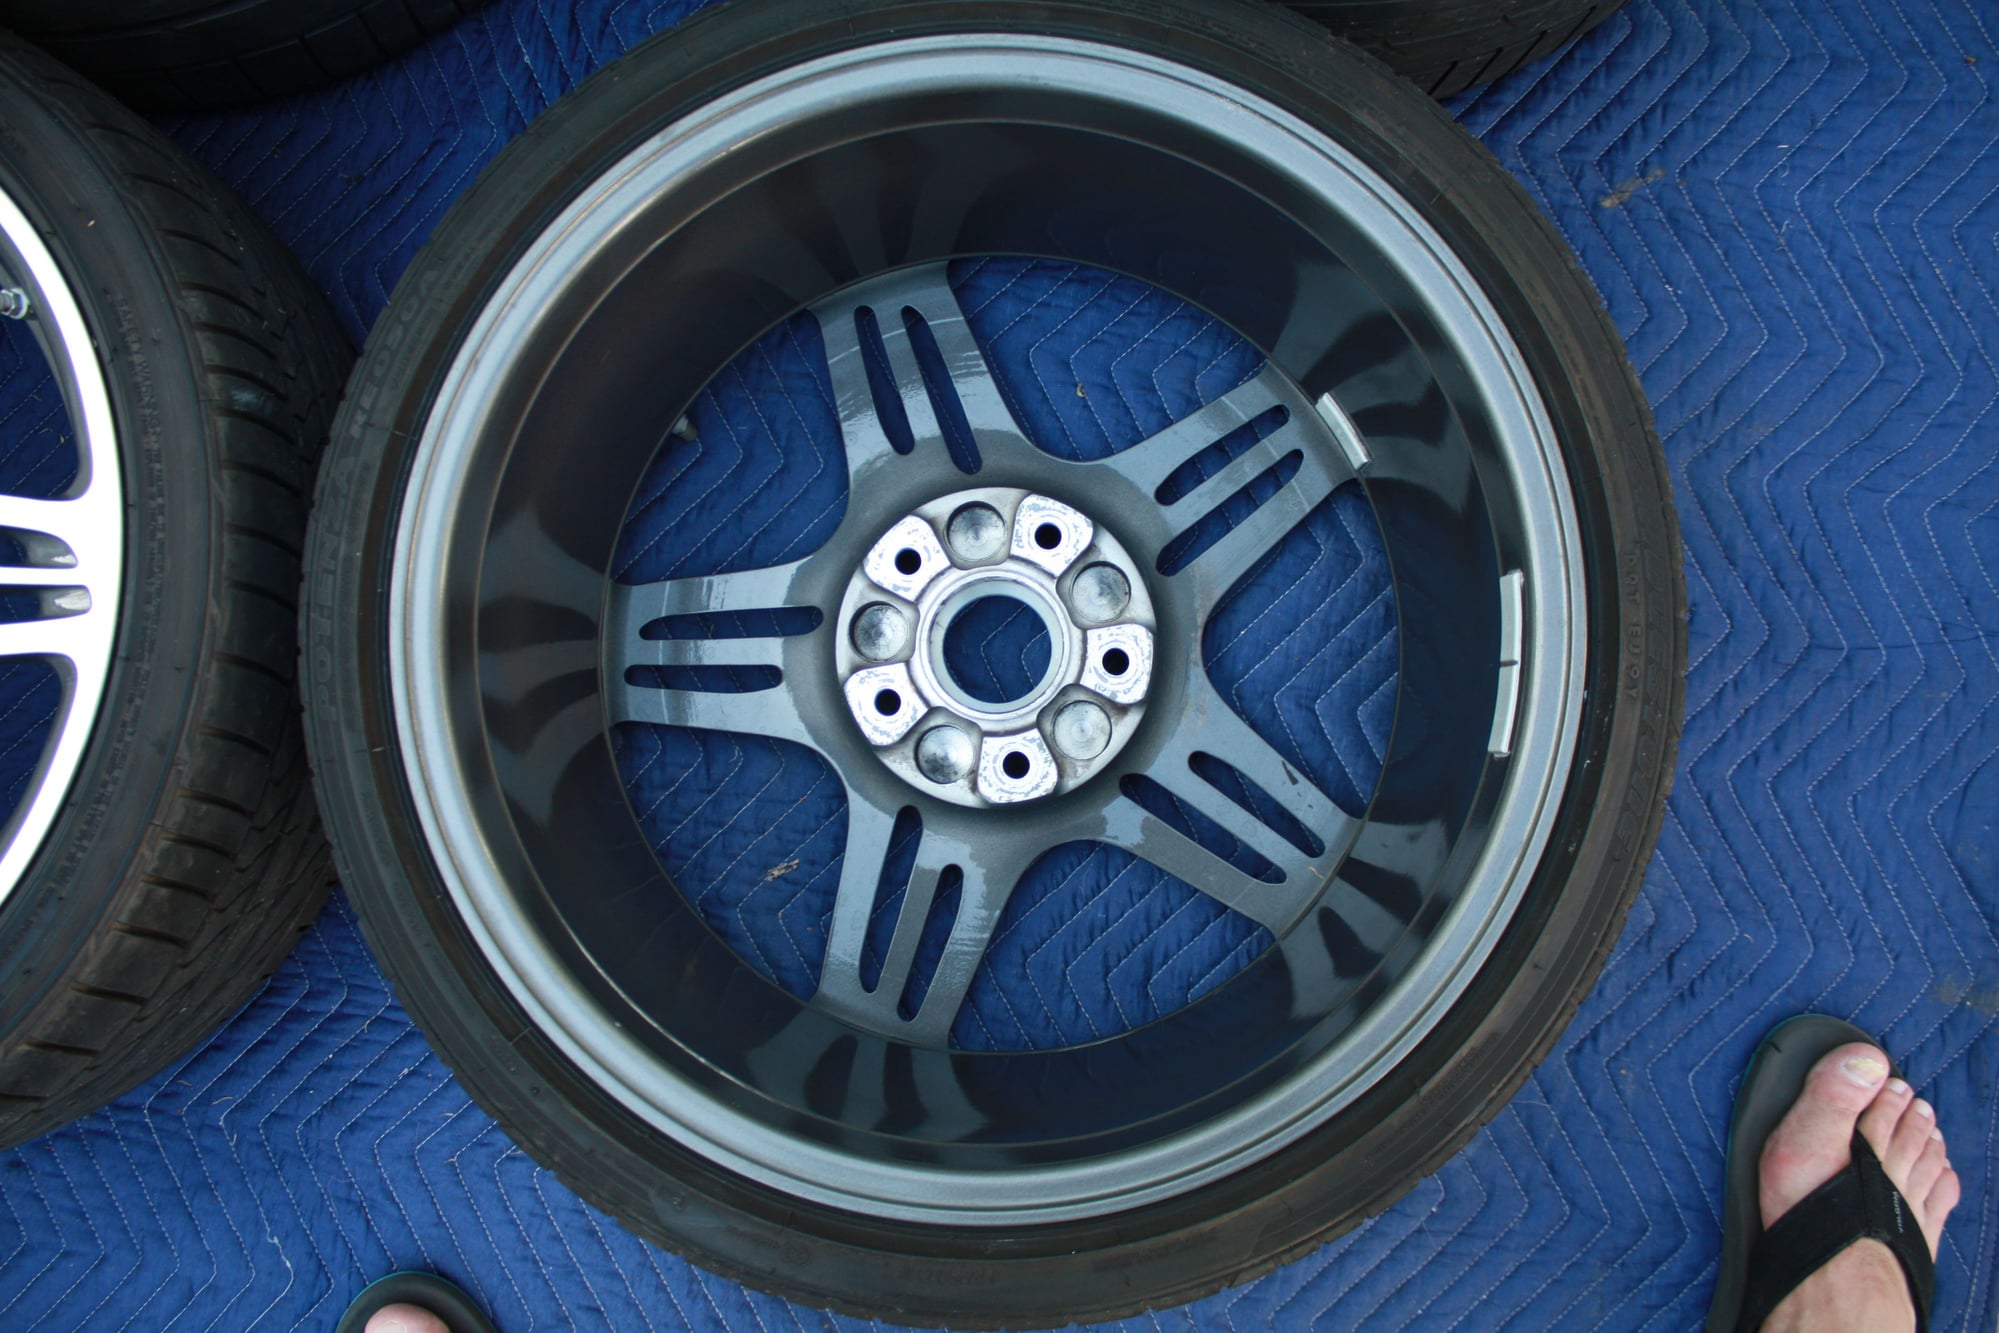 Wheels and Tires/Axles - 997 Turbo Wheels and Tires - Used - 2007 Porsche 911 - Pewaukee, WI 53072, United States